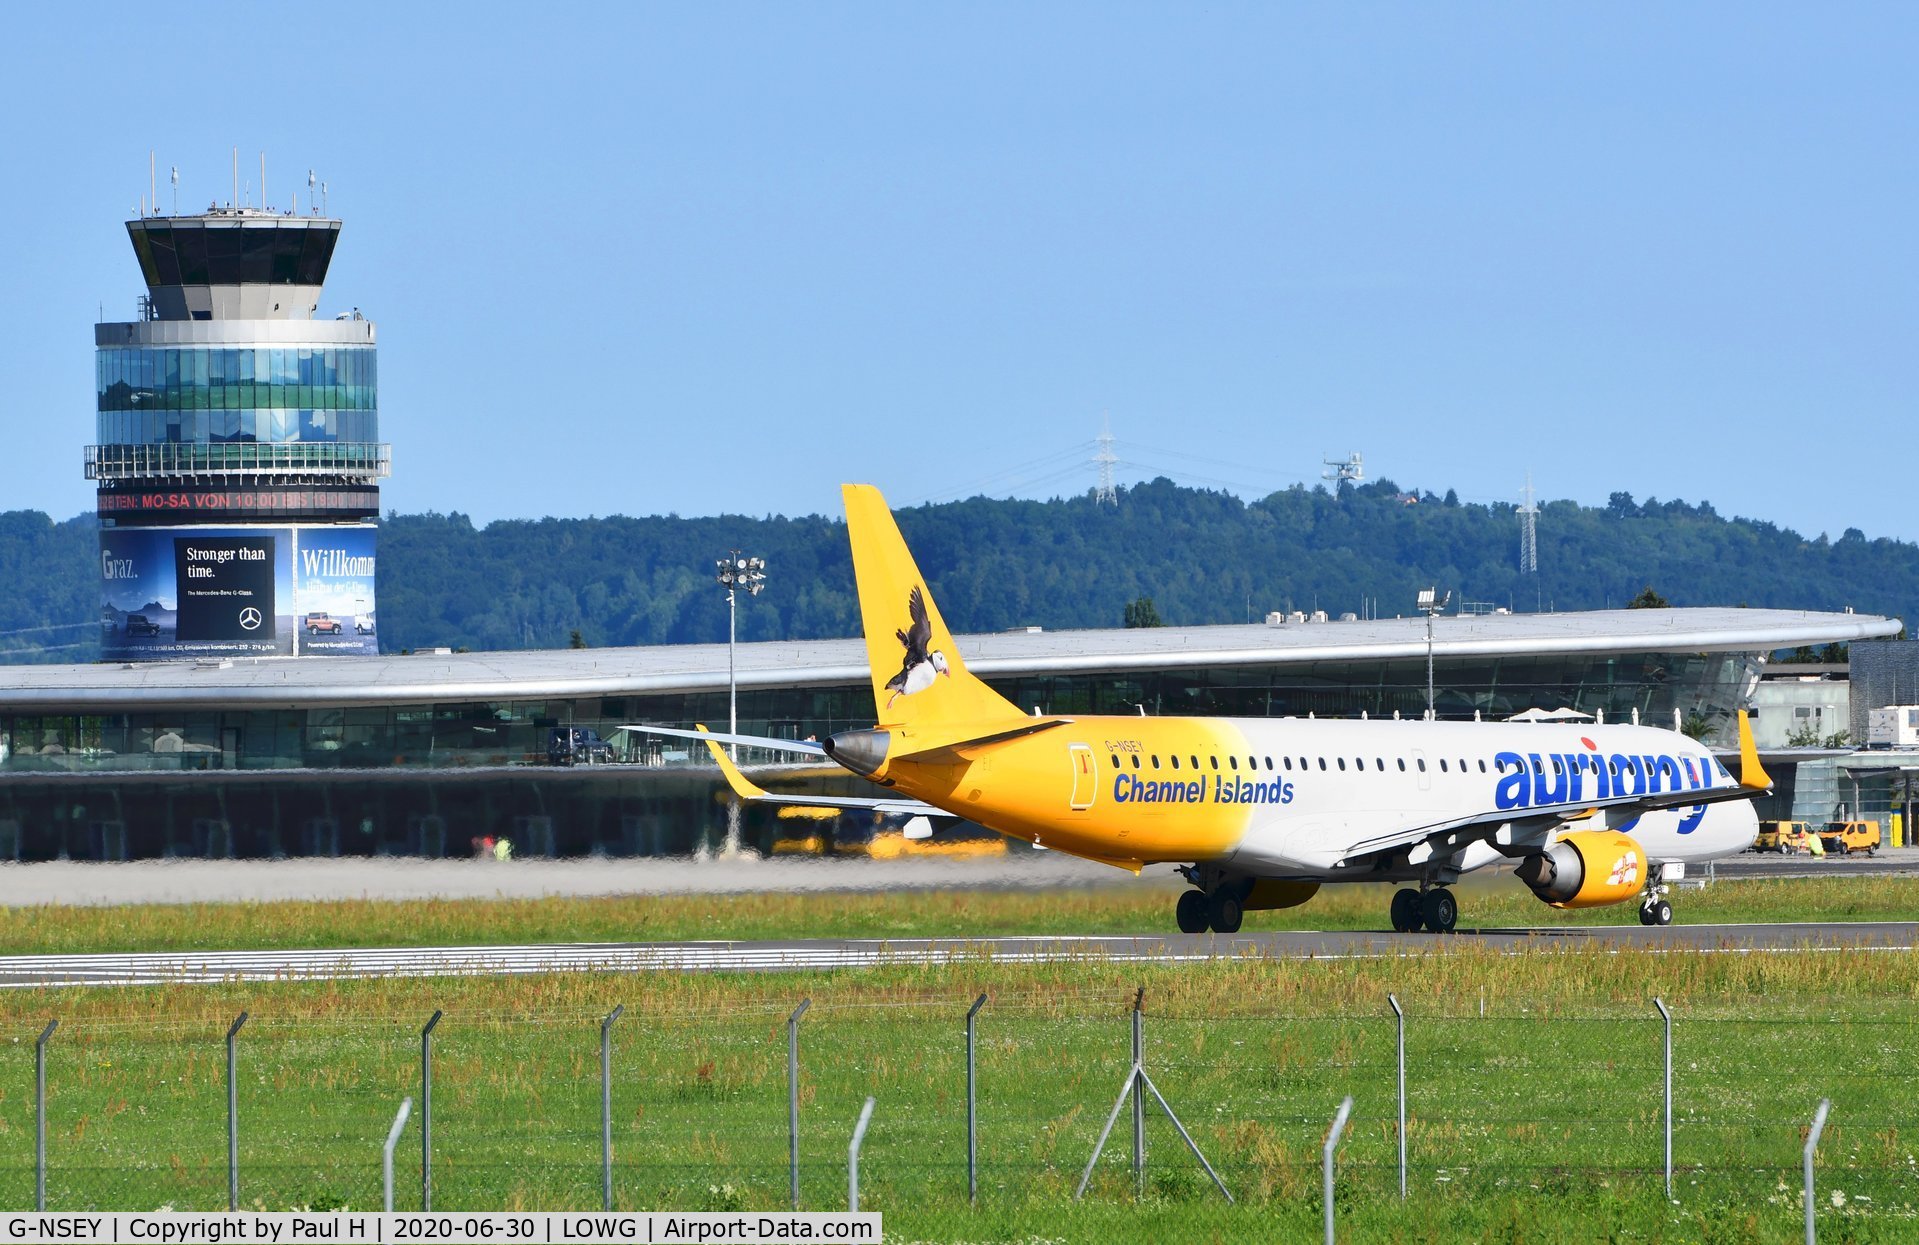 G-NSEY, 2014 Embraer 195STD (ERJ-190-200STD) C/N 19000671, Aurigny Erj195 lining up for take of at Graz airport LOWG in Austria